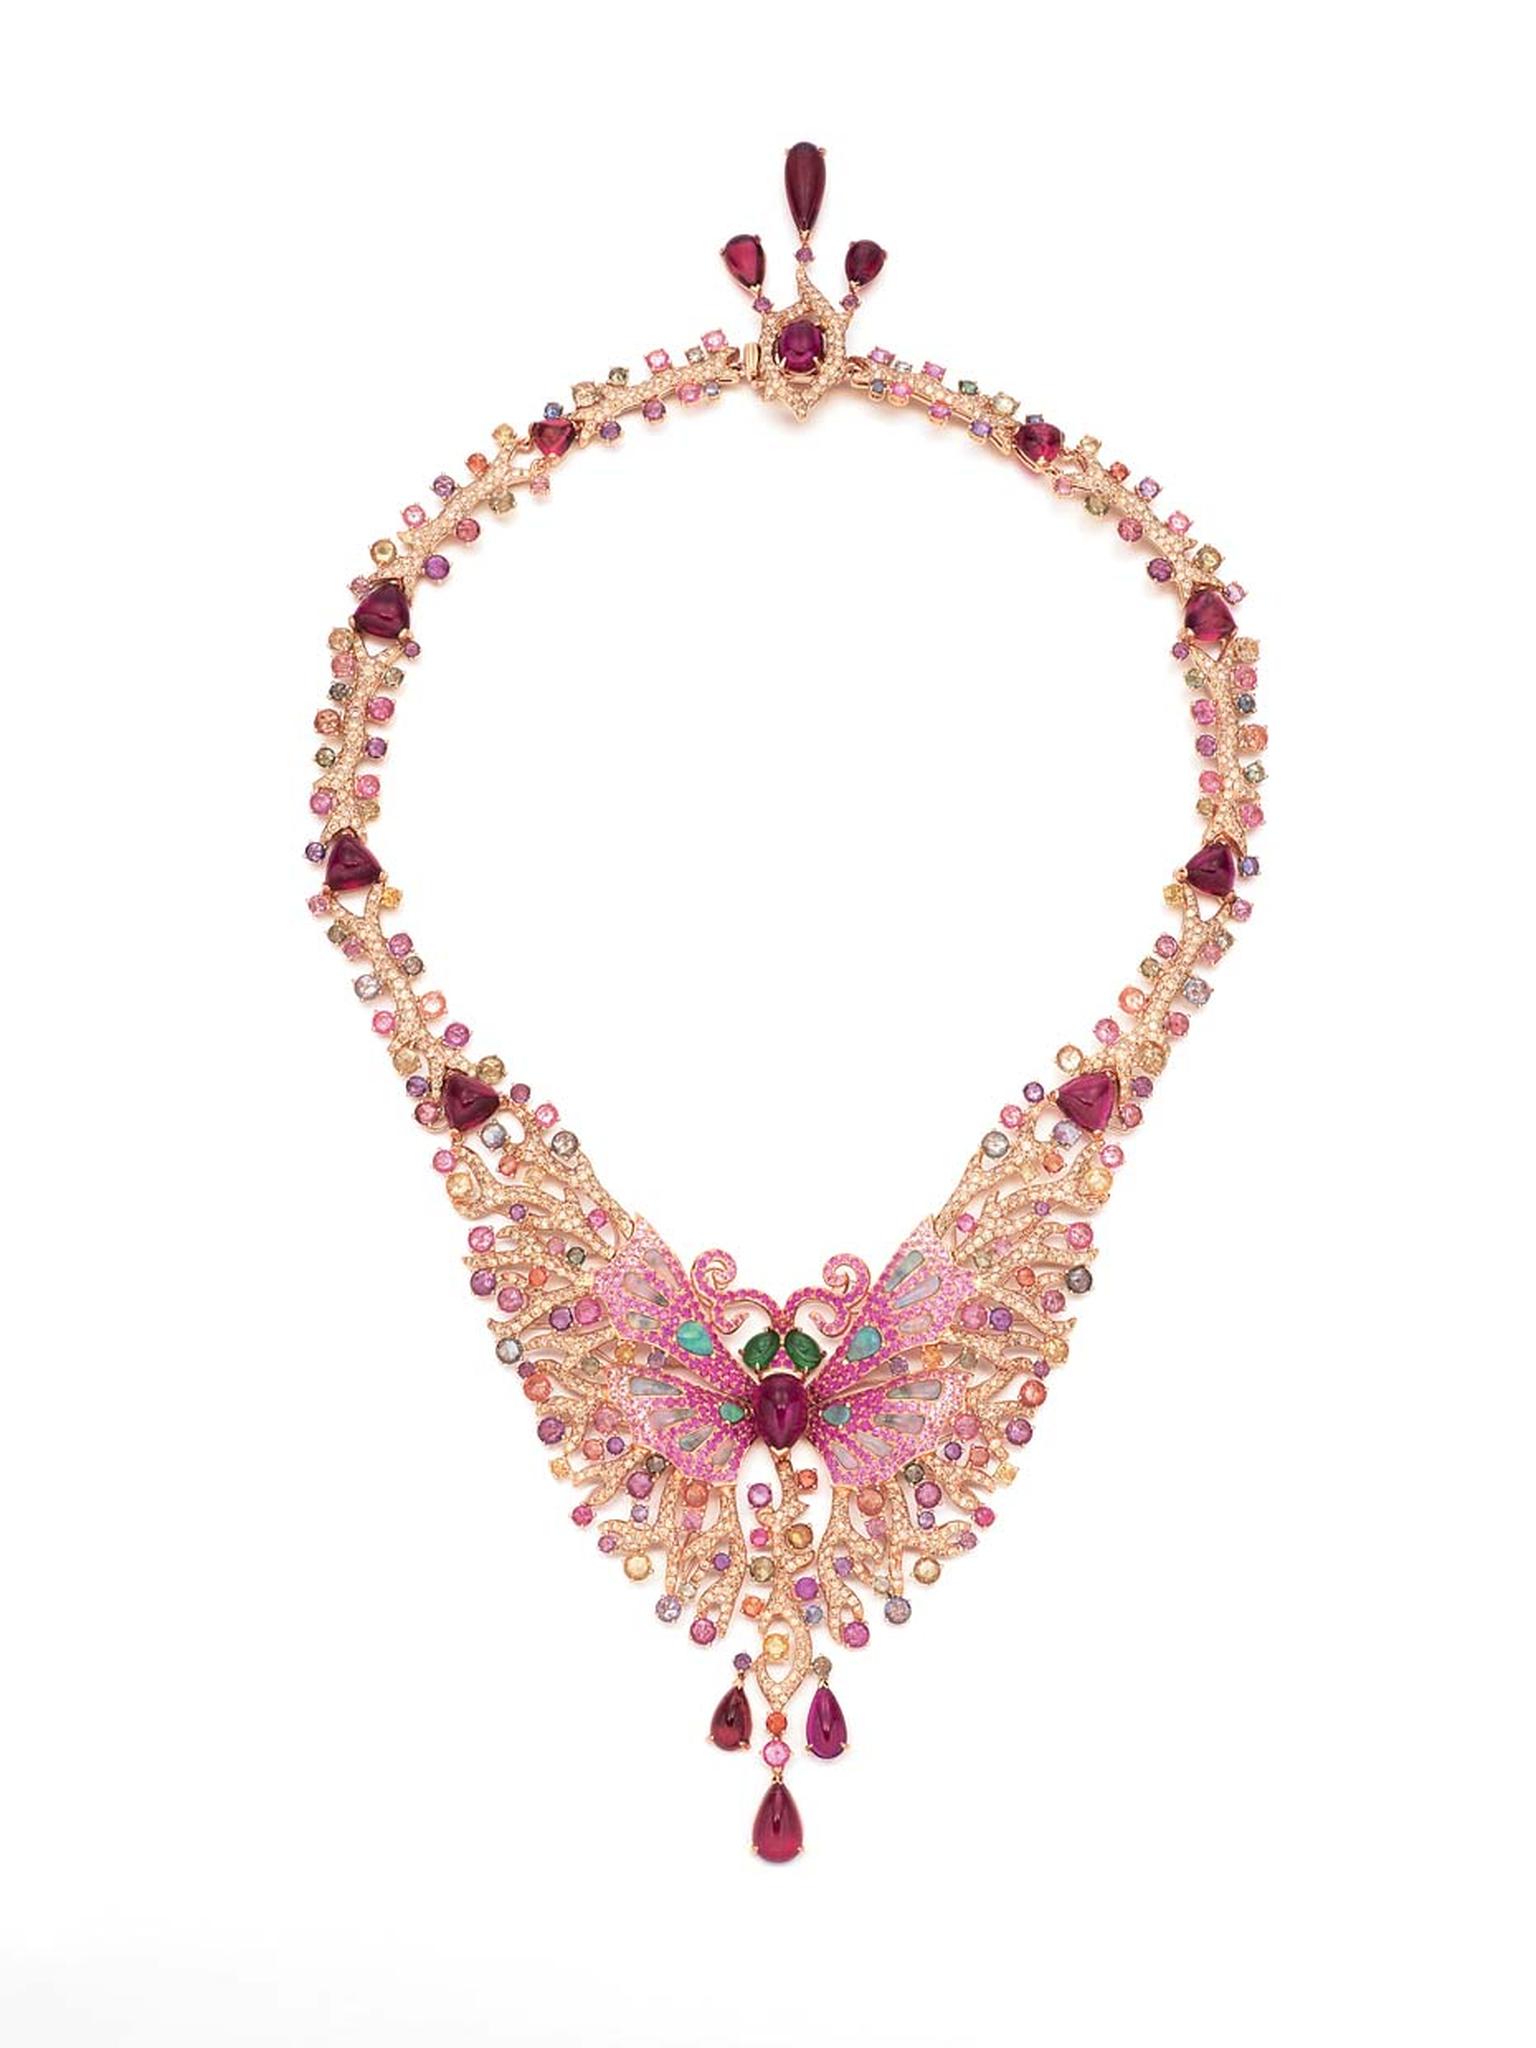 Wendy Yue Madame Butterfly necklace with brown diamonds, opals, rhodolite garnets, green garnets, pink sapphires, diamonds and purple sapphires.